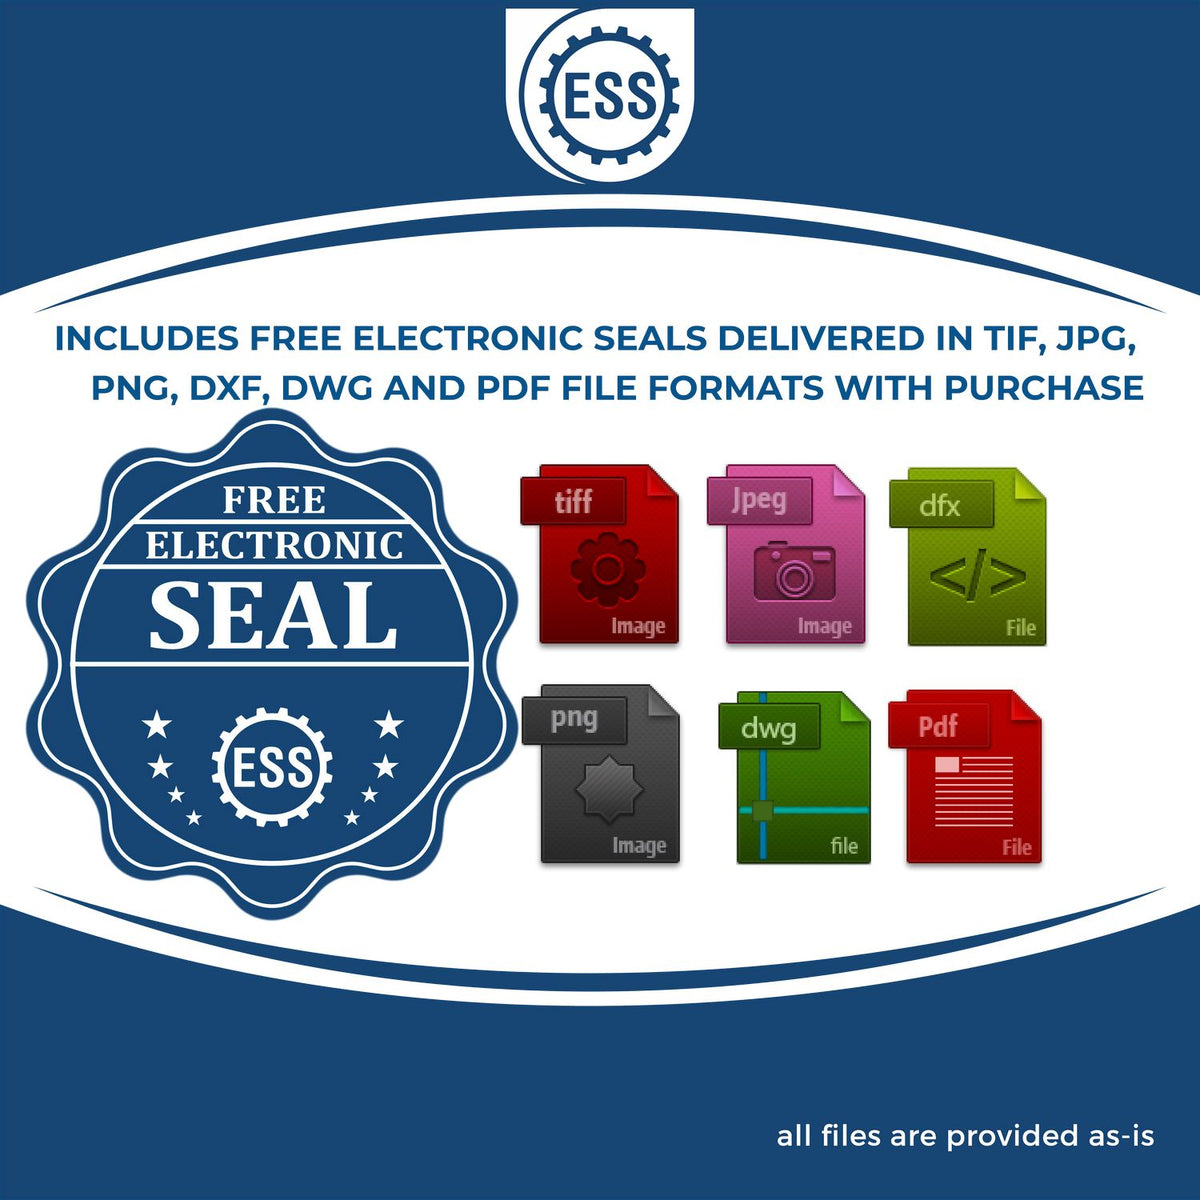 An infographic for the free electronic seal for the Slim Pre-Inked State Seal Notary Stamp for Virginia illustrating the different file type icons such as DXF, DWG, TIF, JPG and PNG.